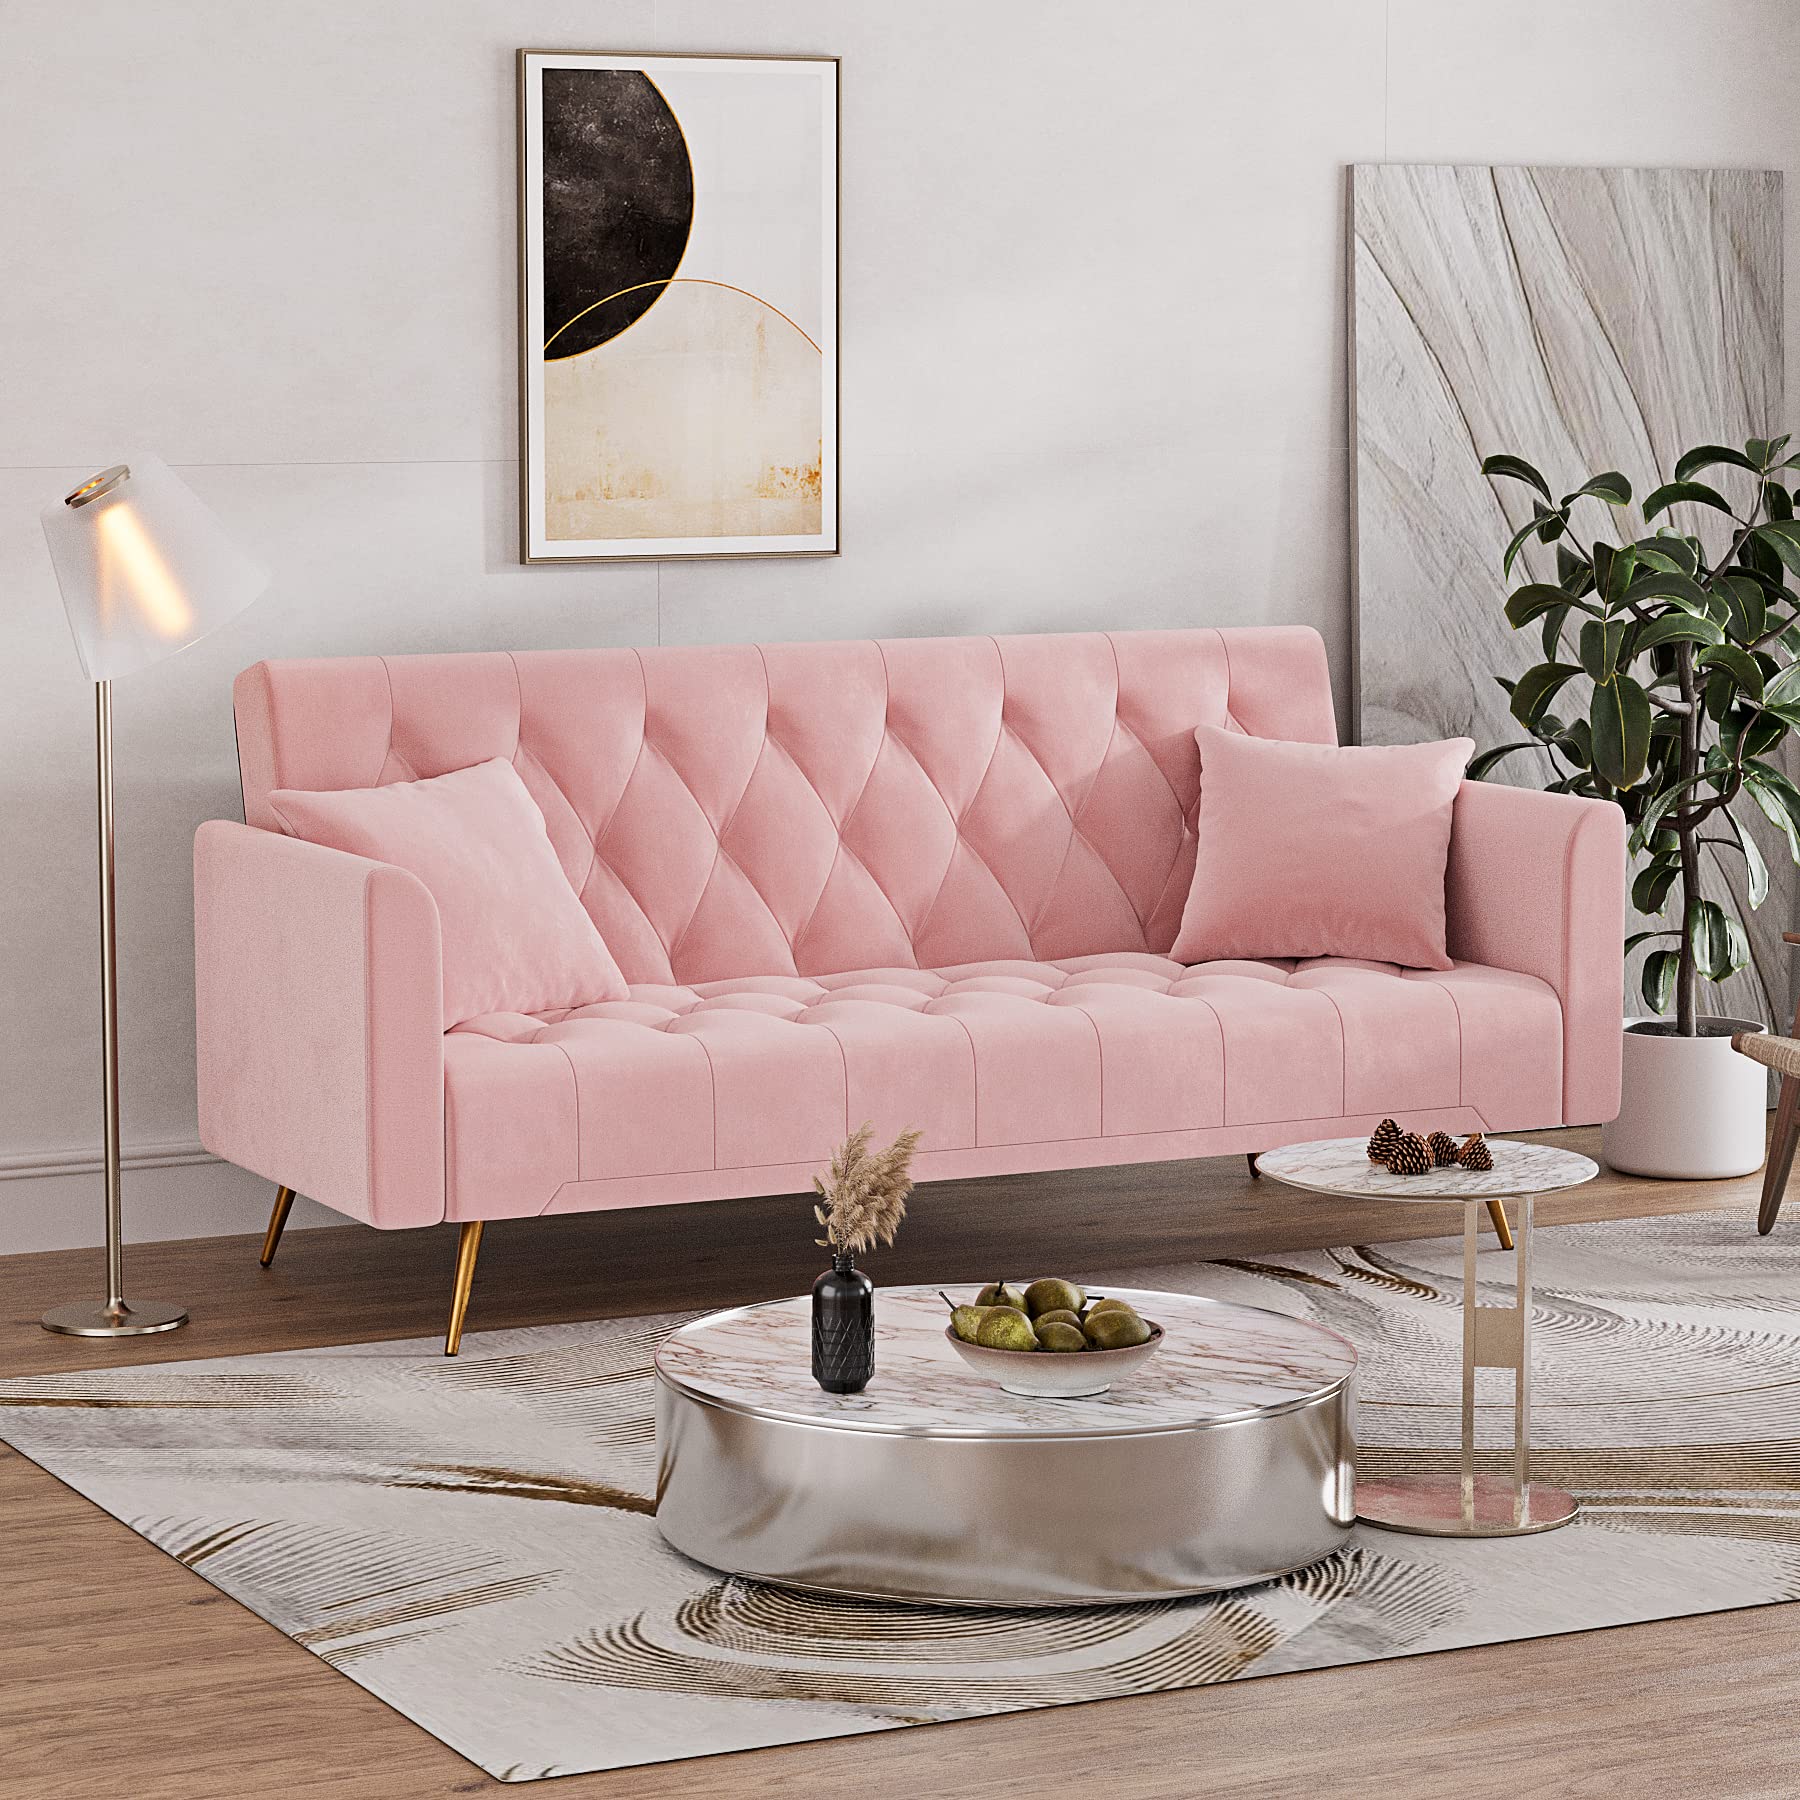 Where Can I Buy a Pink Couch for My Living Room?